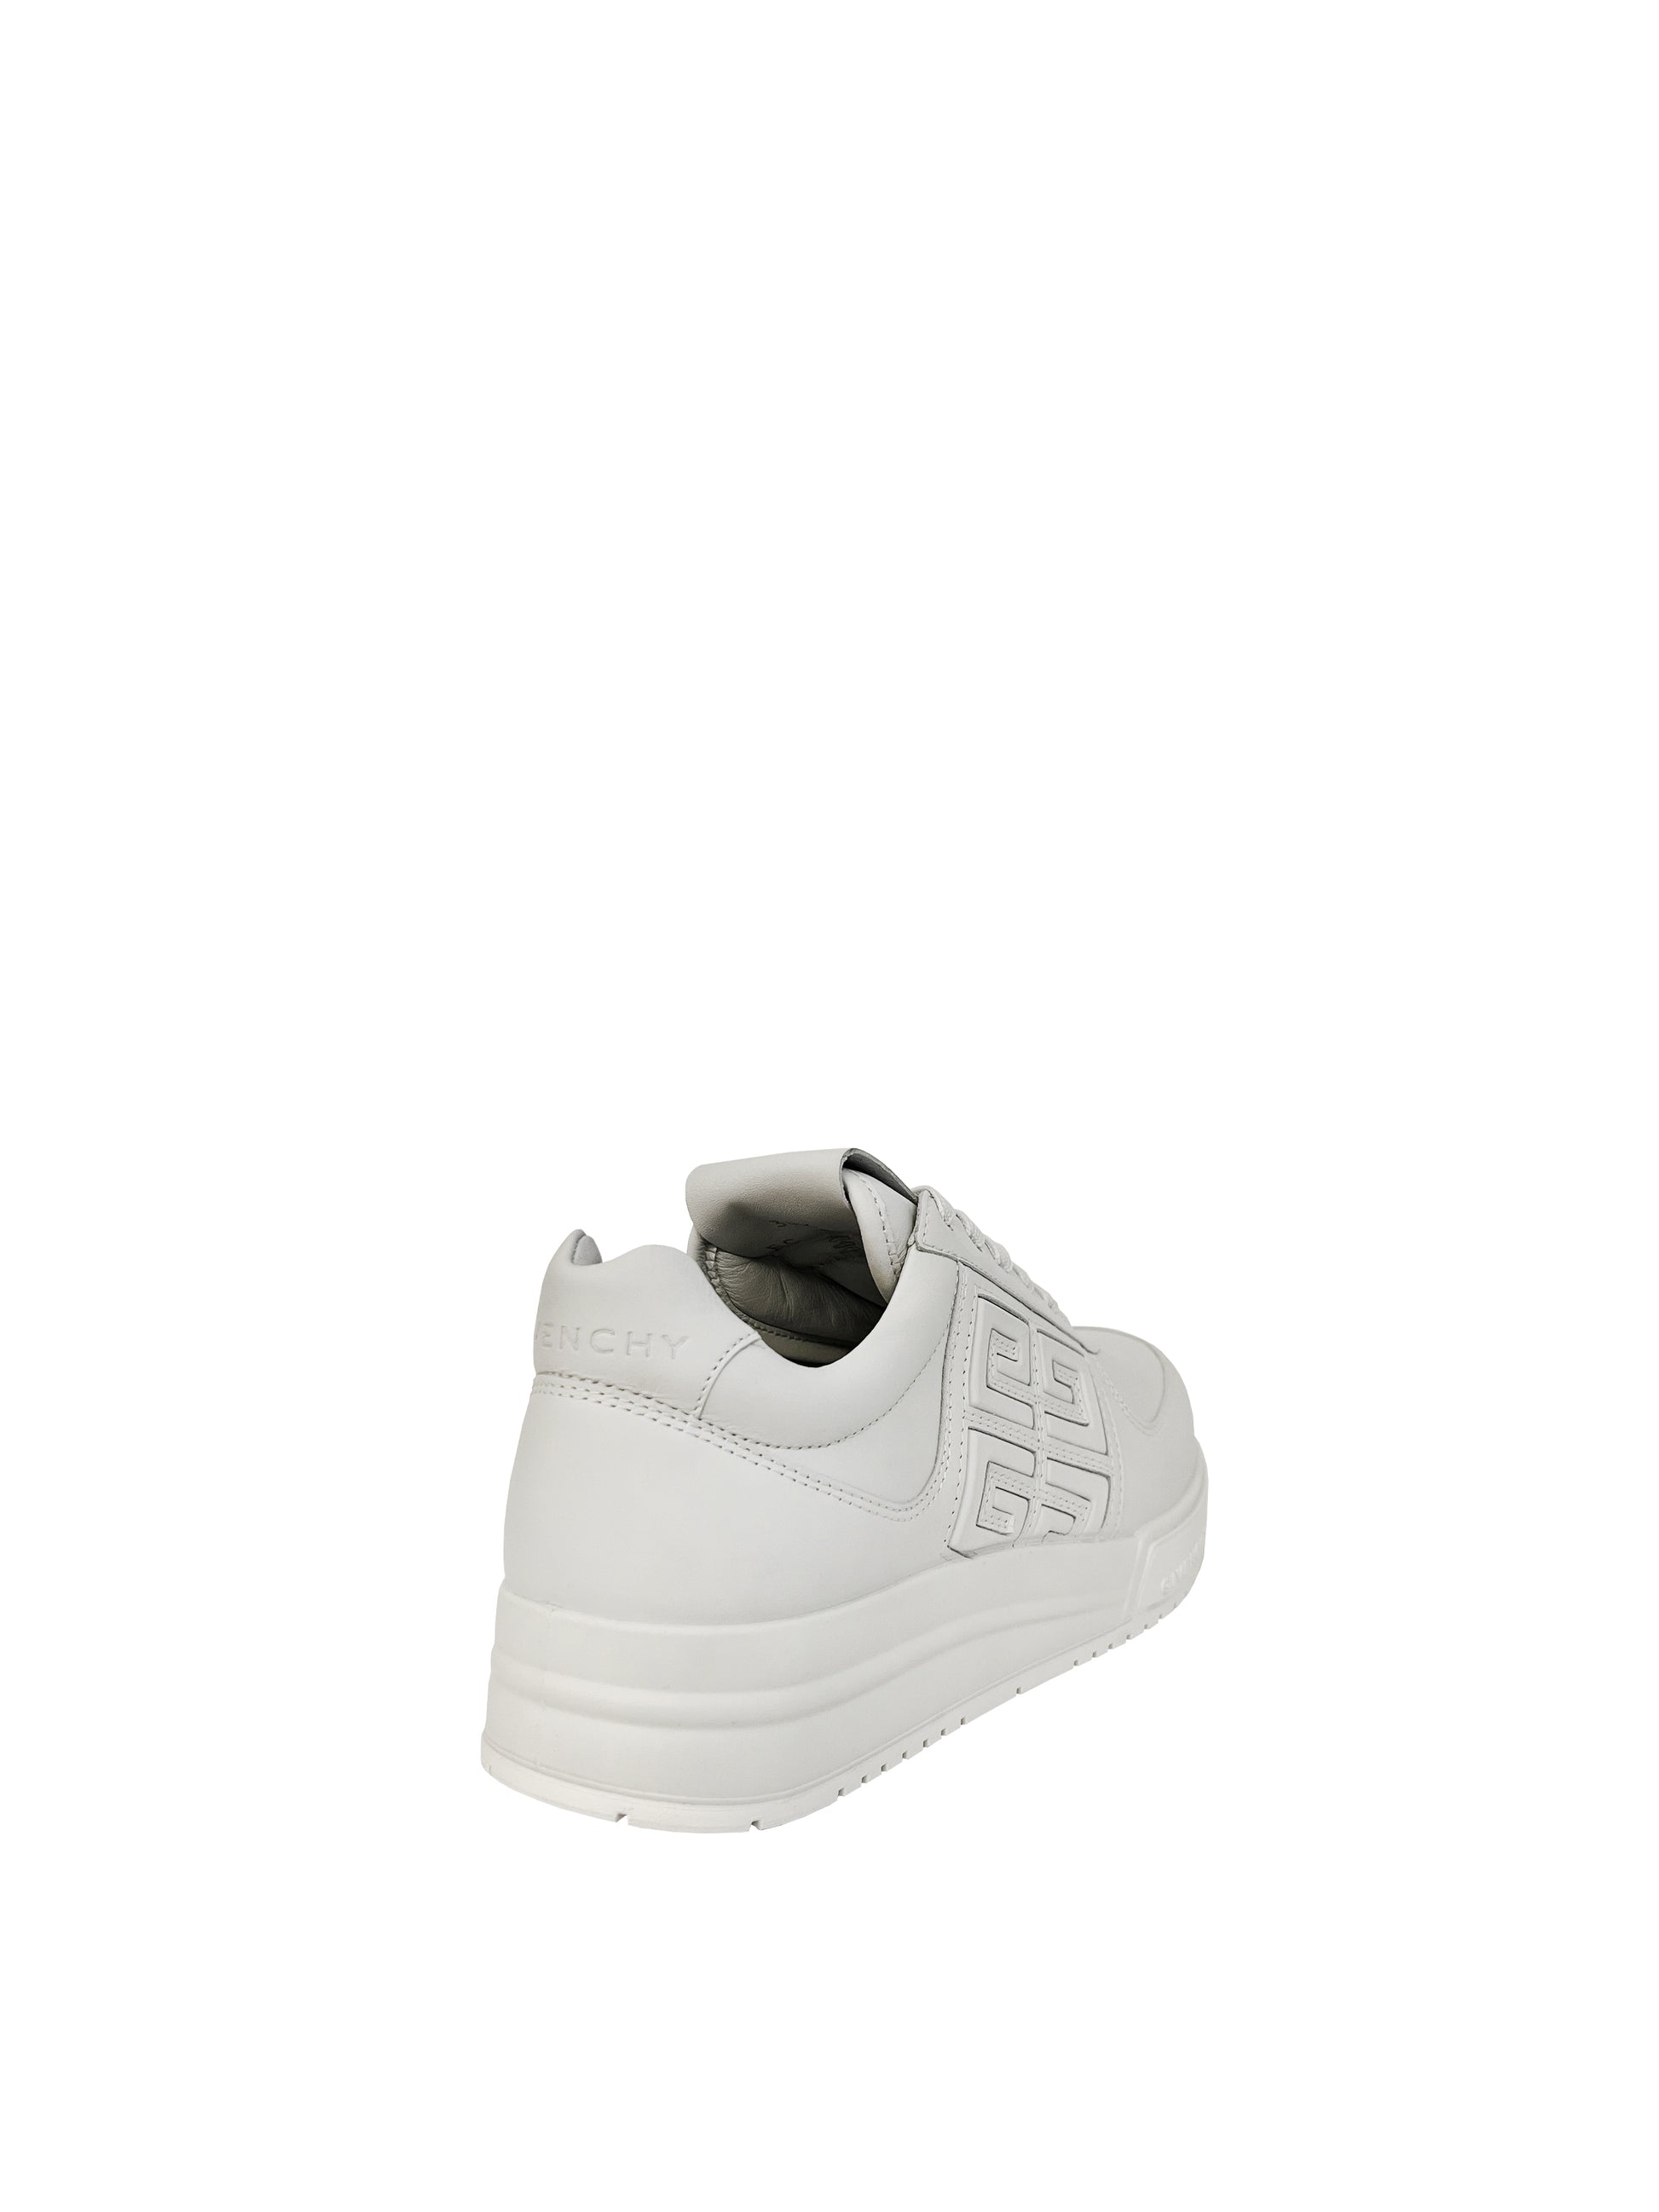 Givenchy Sneakers G4 Weiss - La Boutique Dresden